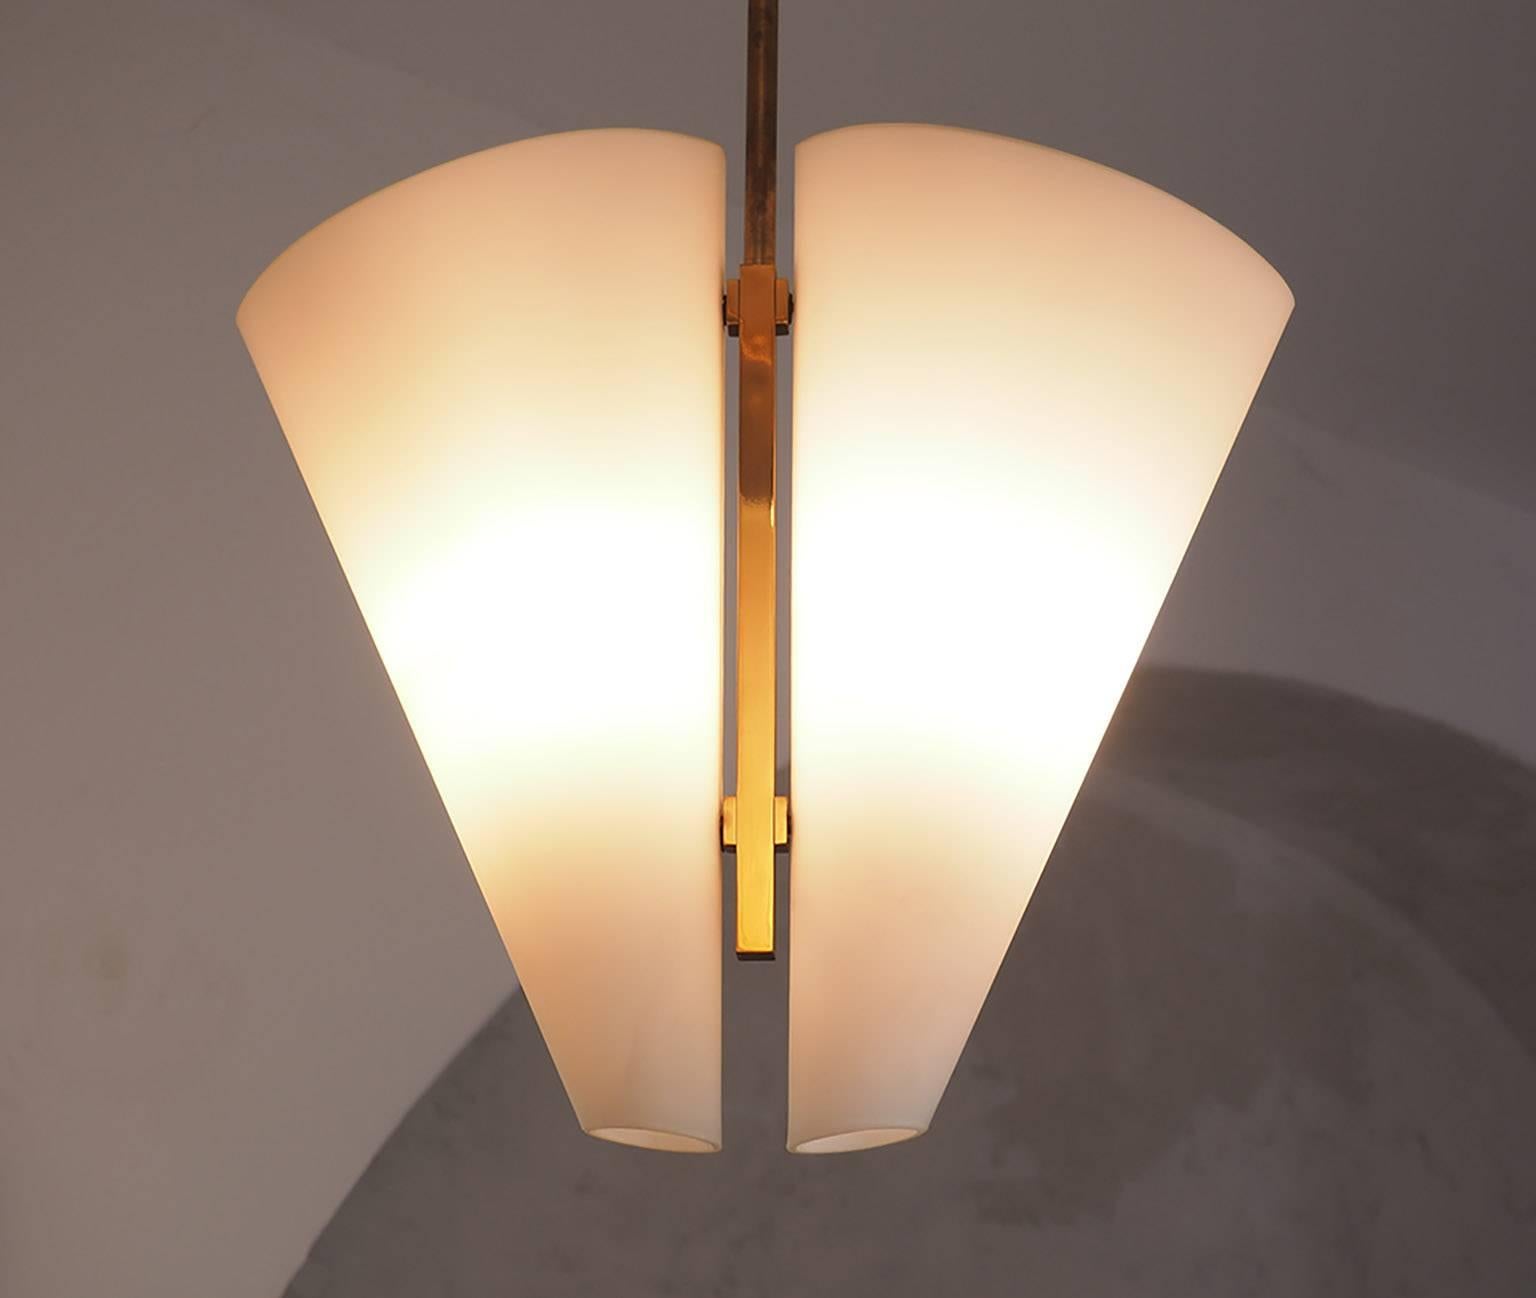 Rare chandelier Mod. 1930 designed by Fontana Arte in Milano during the second half of the 1950s. 
Rare, timeless  and essential elegance from 1950s and 60s  Fontana Arte production.
Two satin white glass conical shades are backed by an elegant